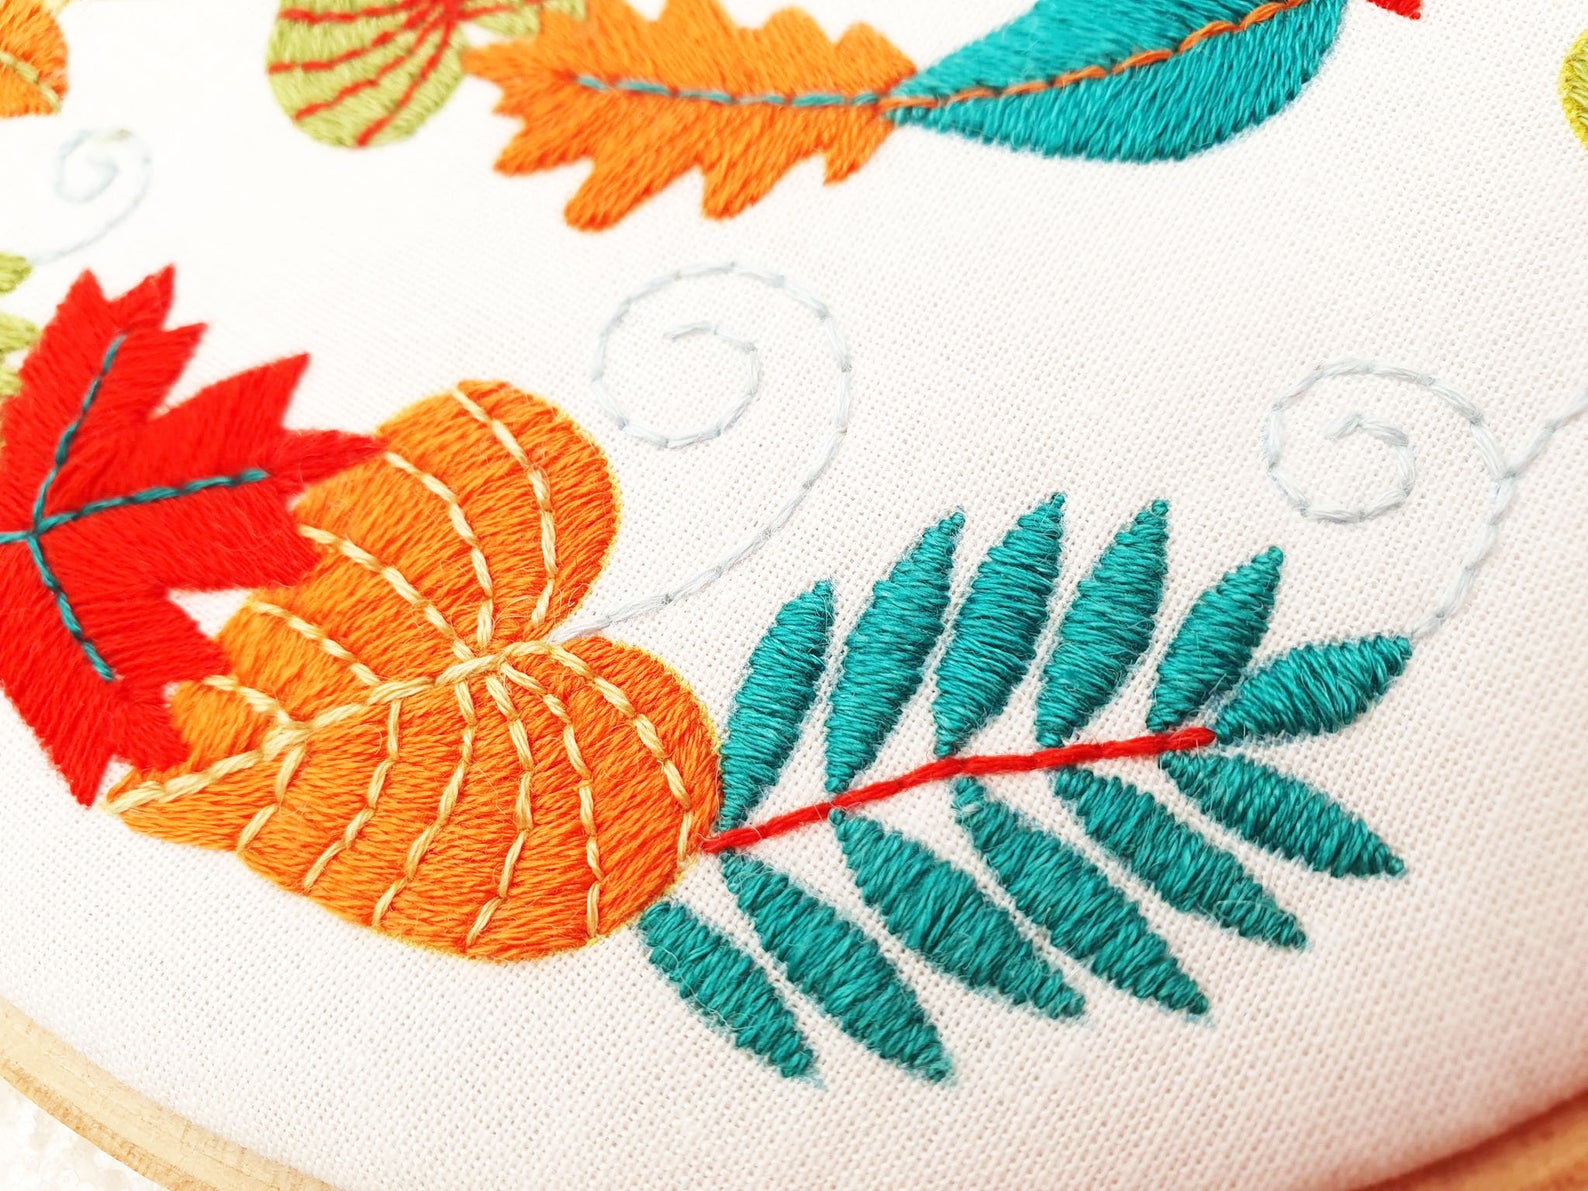 Autumn Leaves Embroidery Fabric Pattern Pack - Fabric Packs - ohsewbootiful